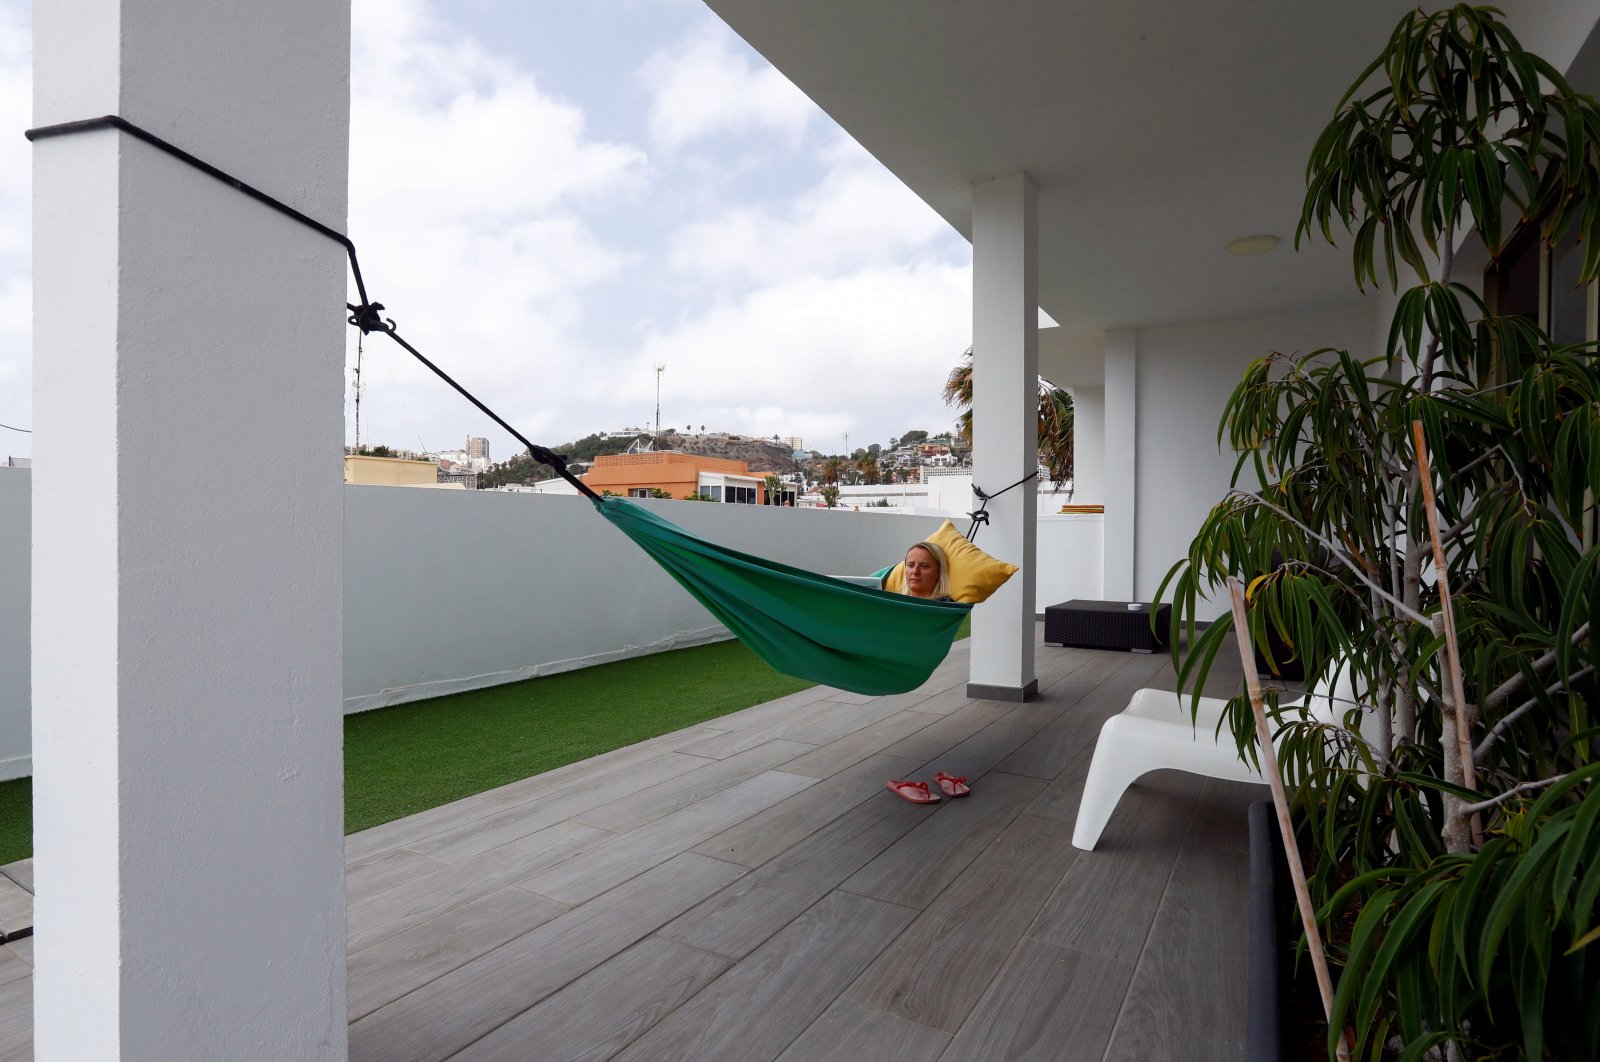 Olga Paul, a 34-year-old German who works remotely from Las Palmas De Gran Canaria, relaxes in a hammock amid the COVID-19 outbreak, in Gran Canaria, Spain, July 23, 2021. (Reuters Photo)